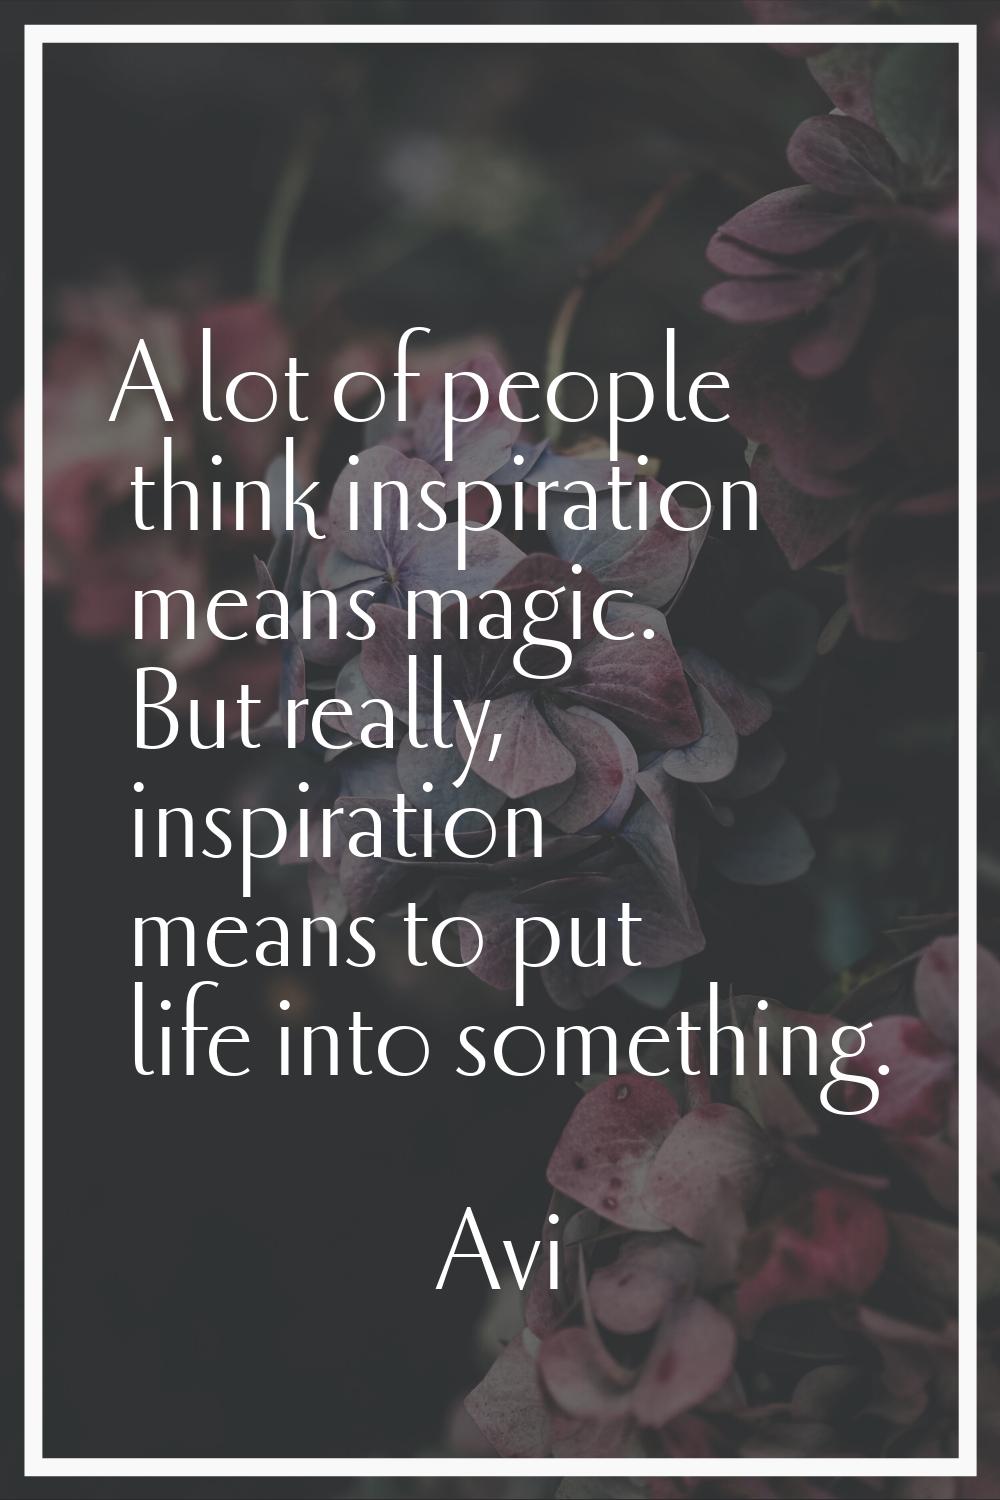 A lot of people think inspiration means magic. But really, inspiration means to put life into somet